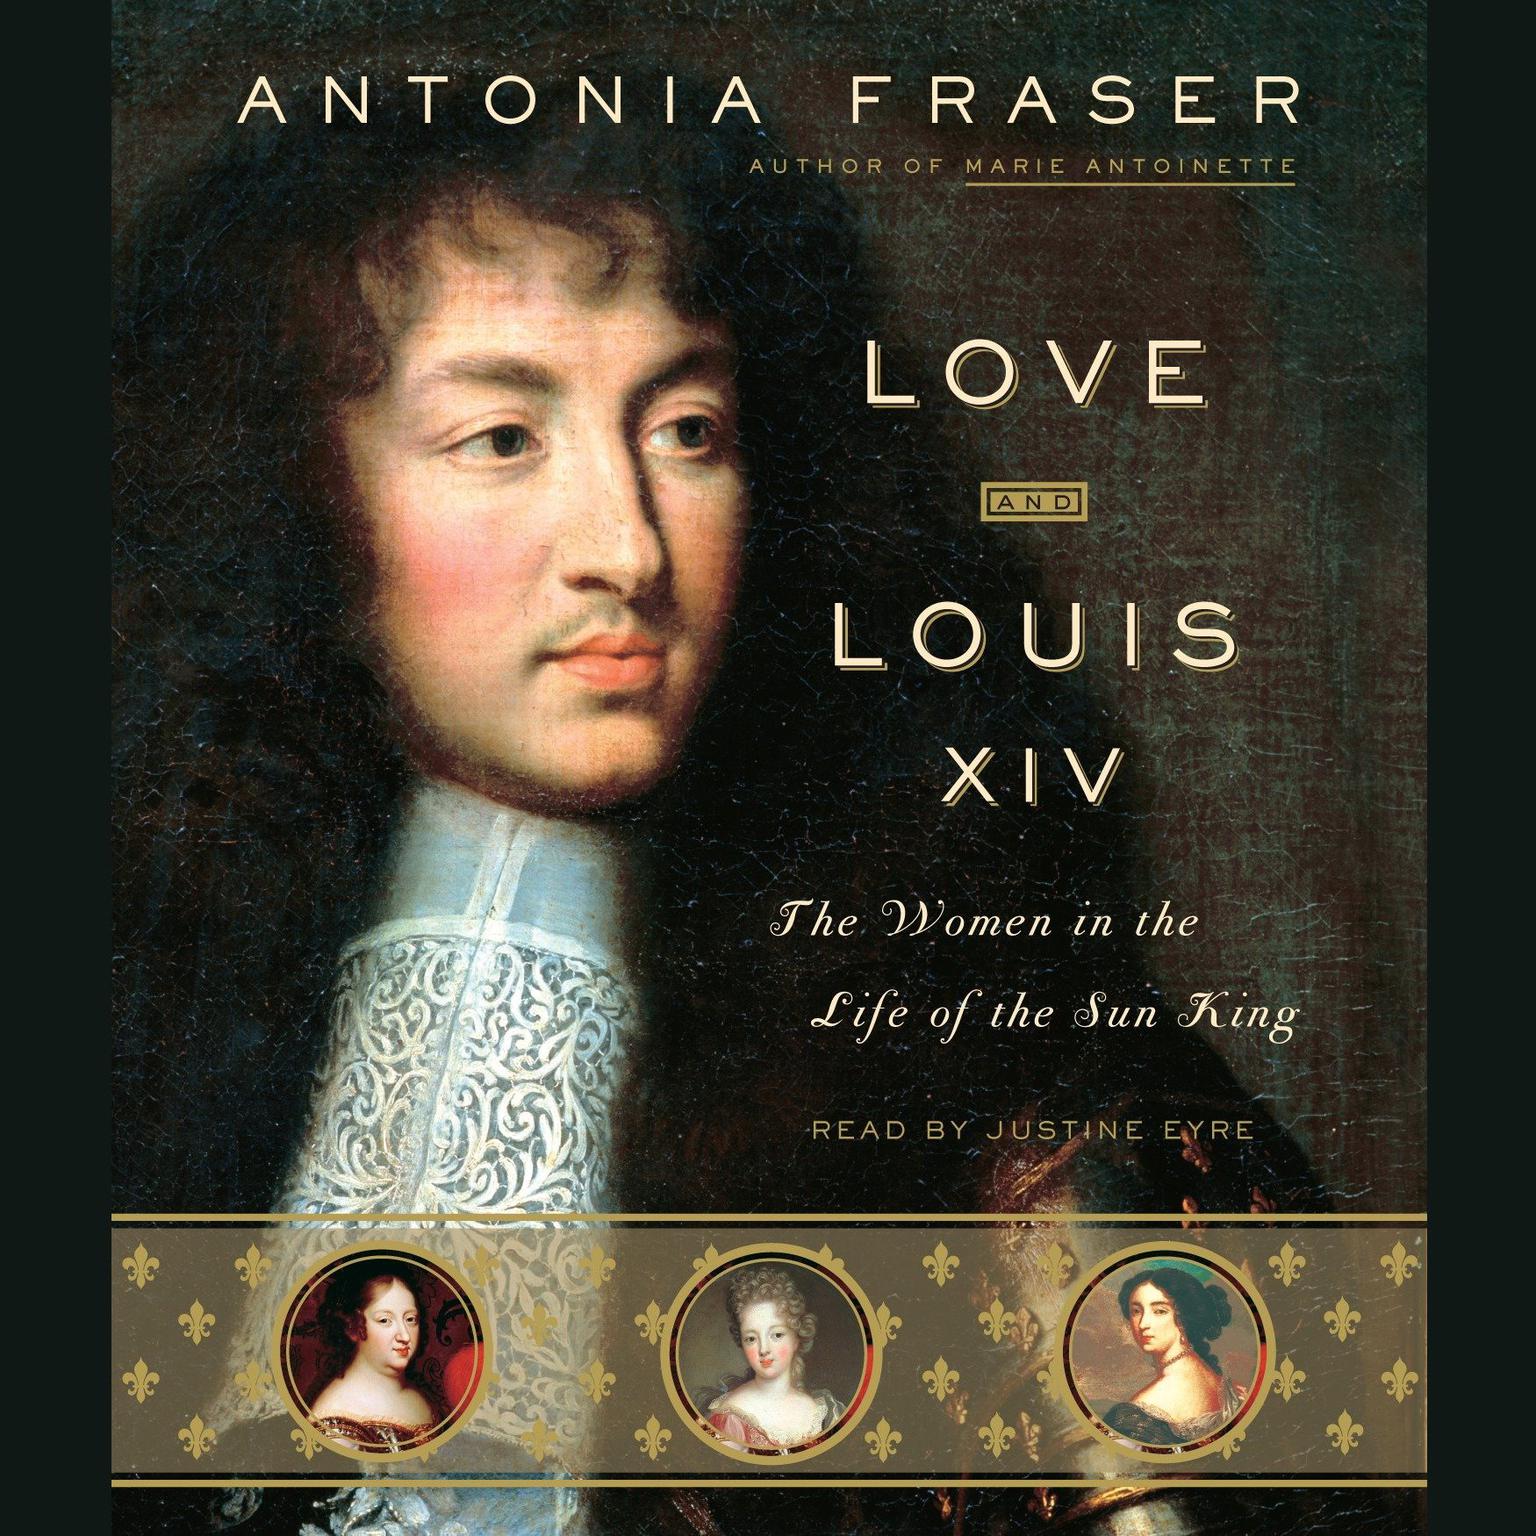 Love and Louis XIV (Abridged): The Women in the Life of the Sun King Audiobook, by Antonia Fraser